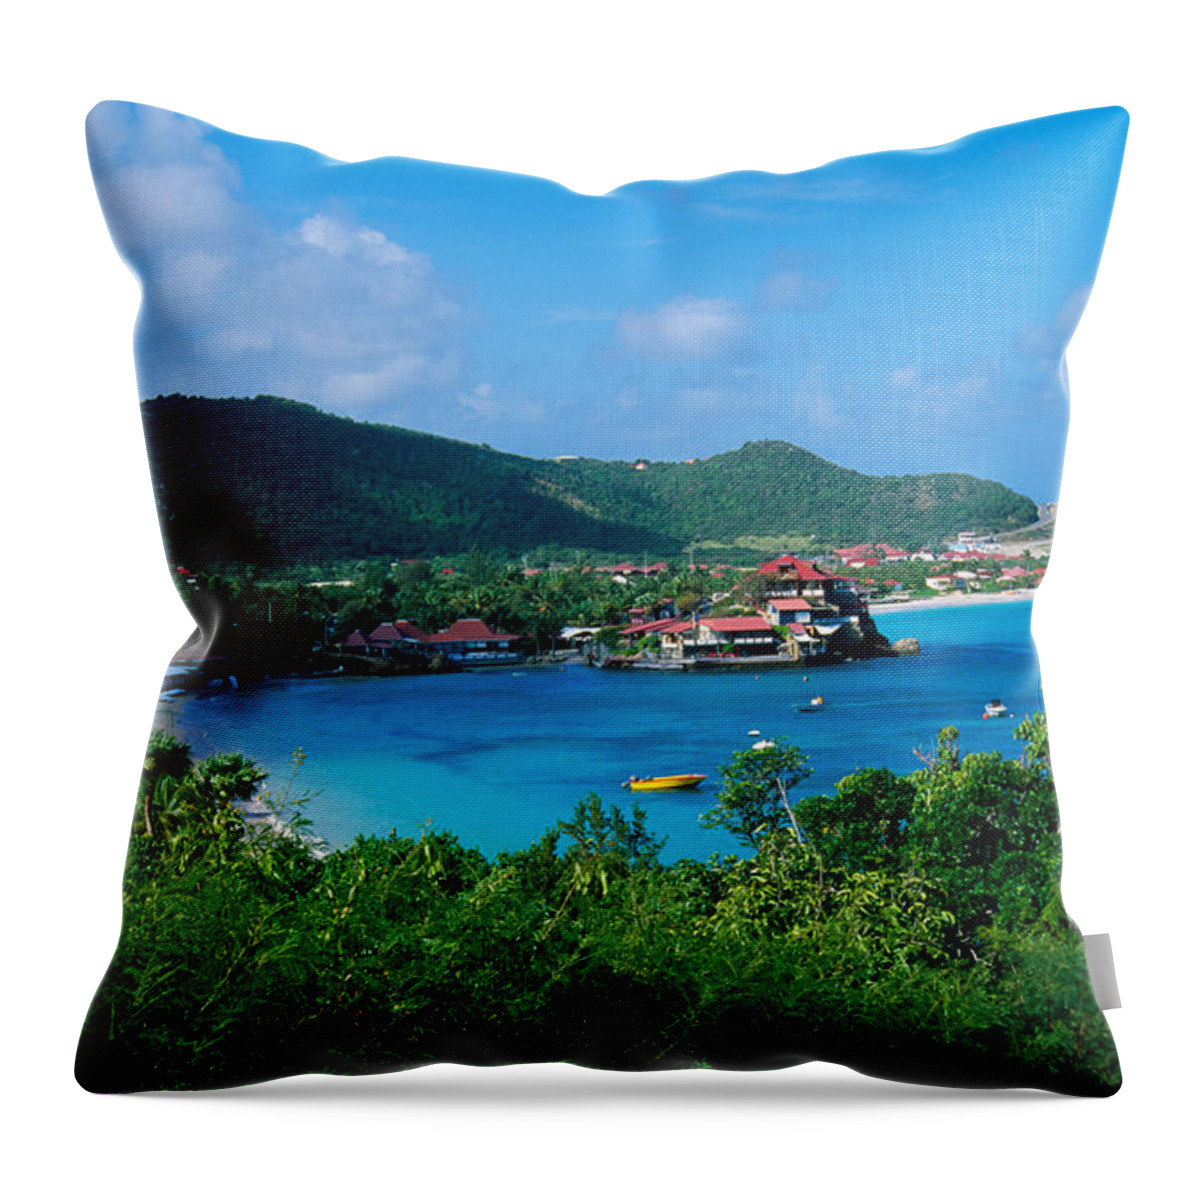 Photography Throw Pillow featuring the photograph Resort Setting, Saint Barth, West by Panoramic Images